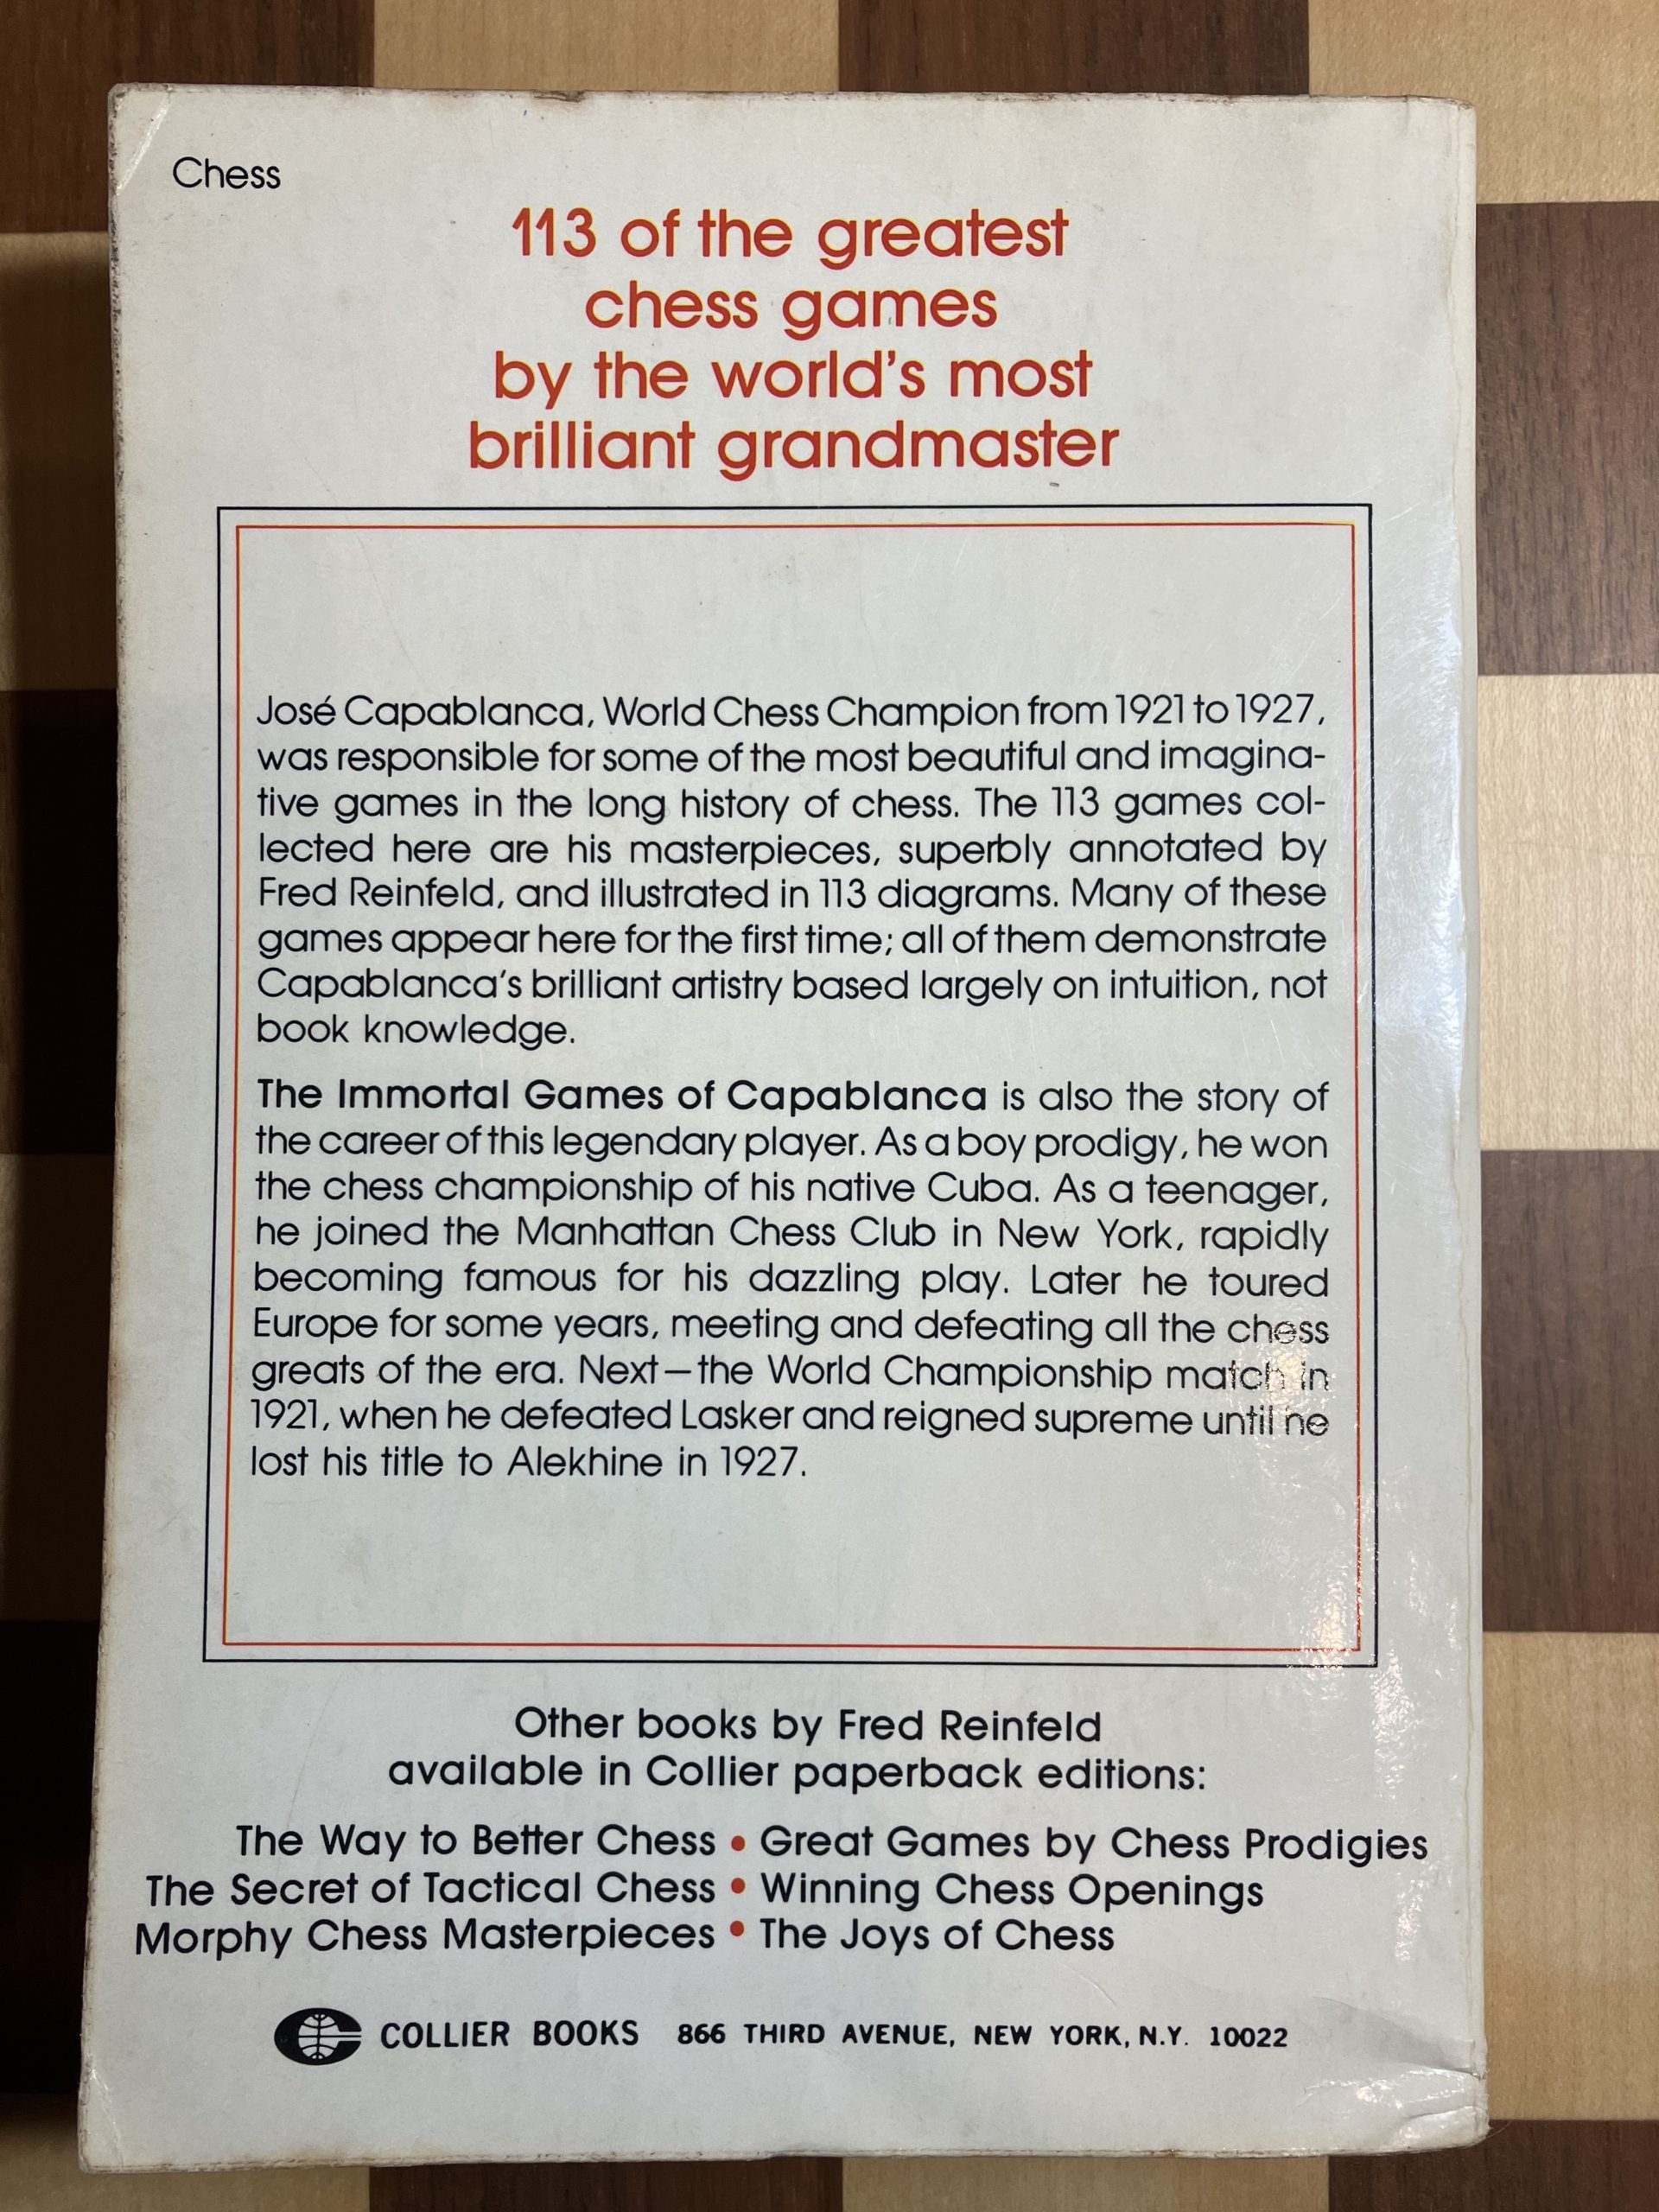 The Immortal Games of Capablanca, Fred Reinfeld, Collier Books, New York, 1974